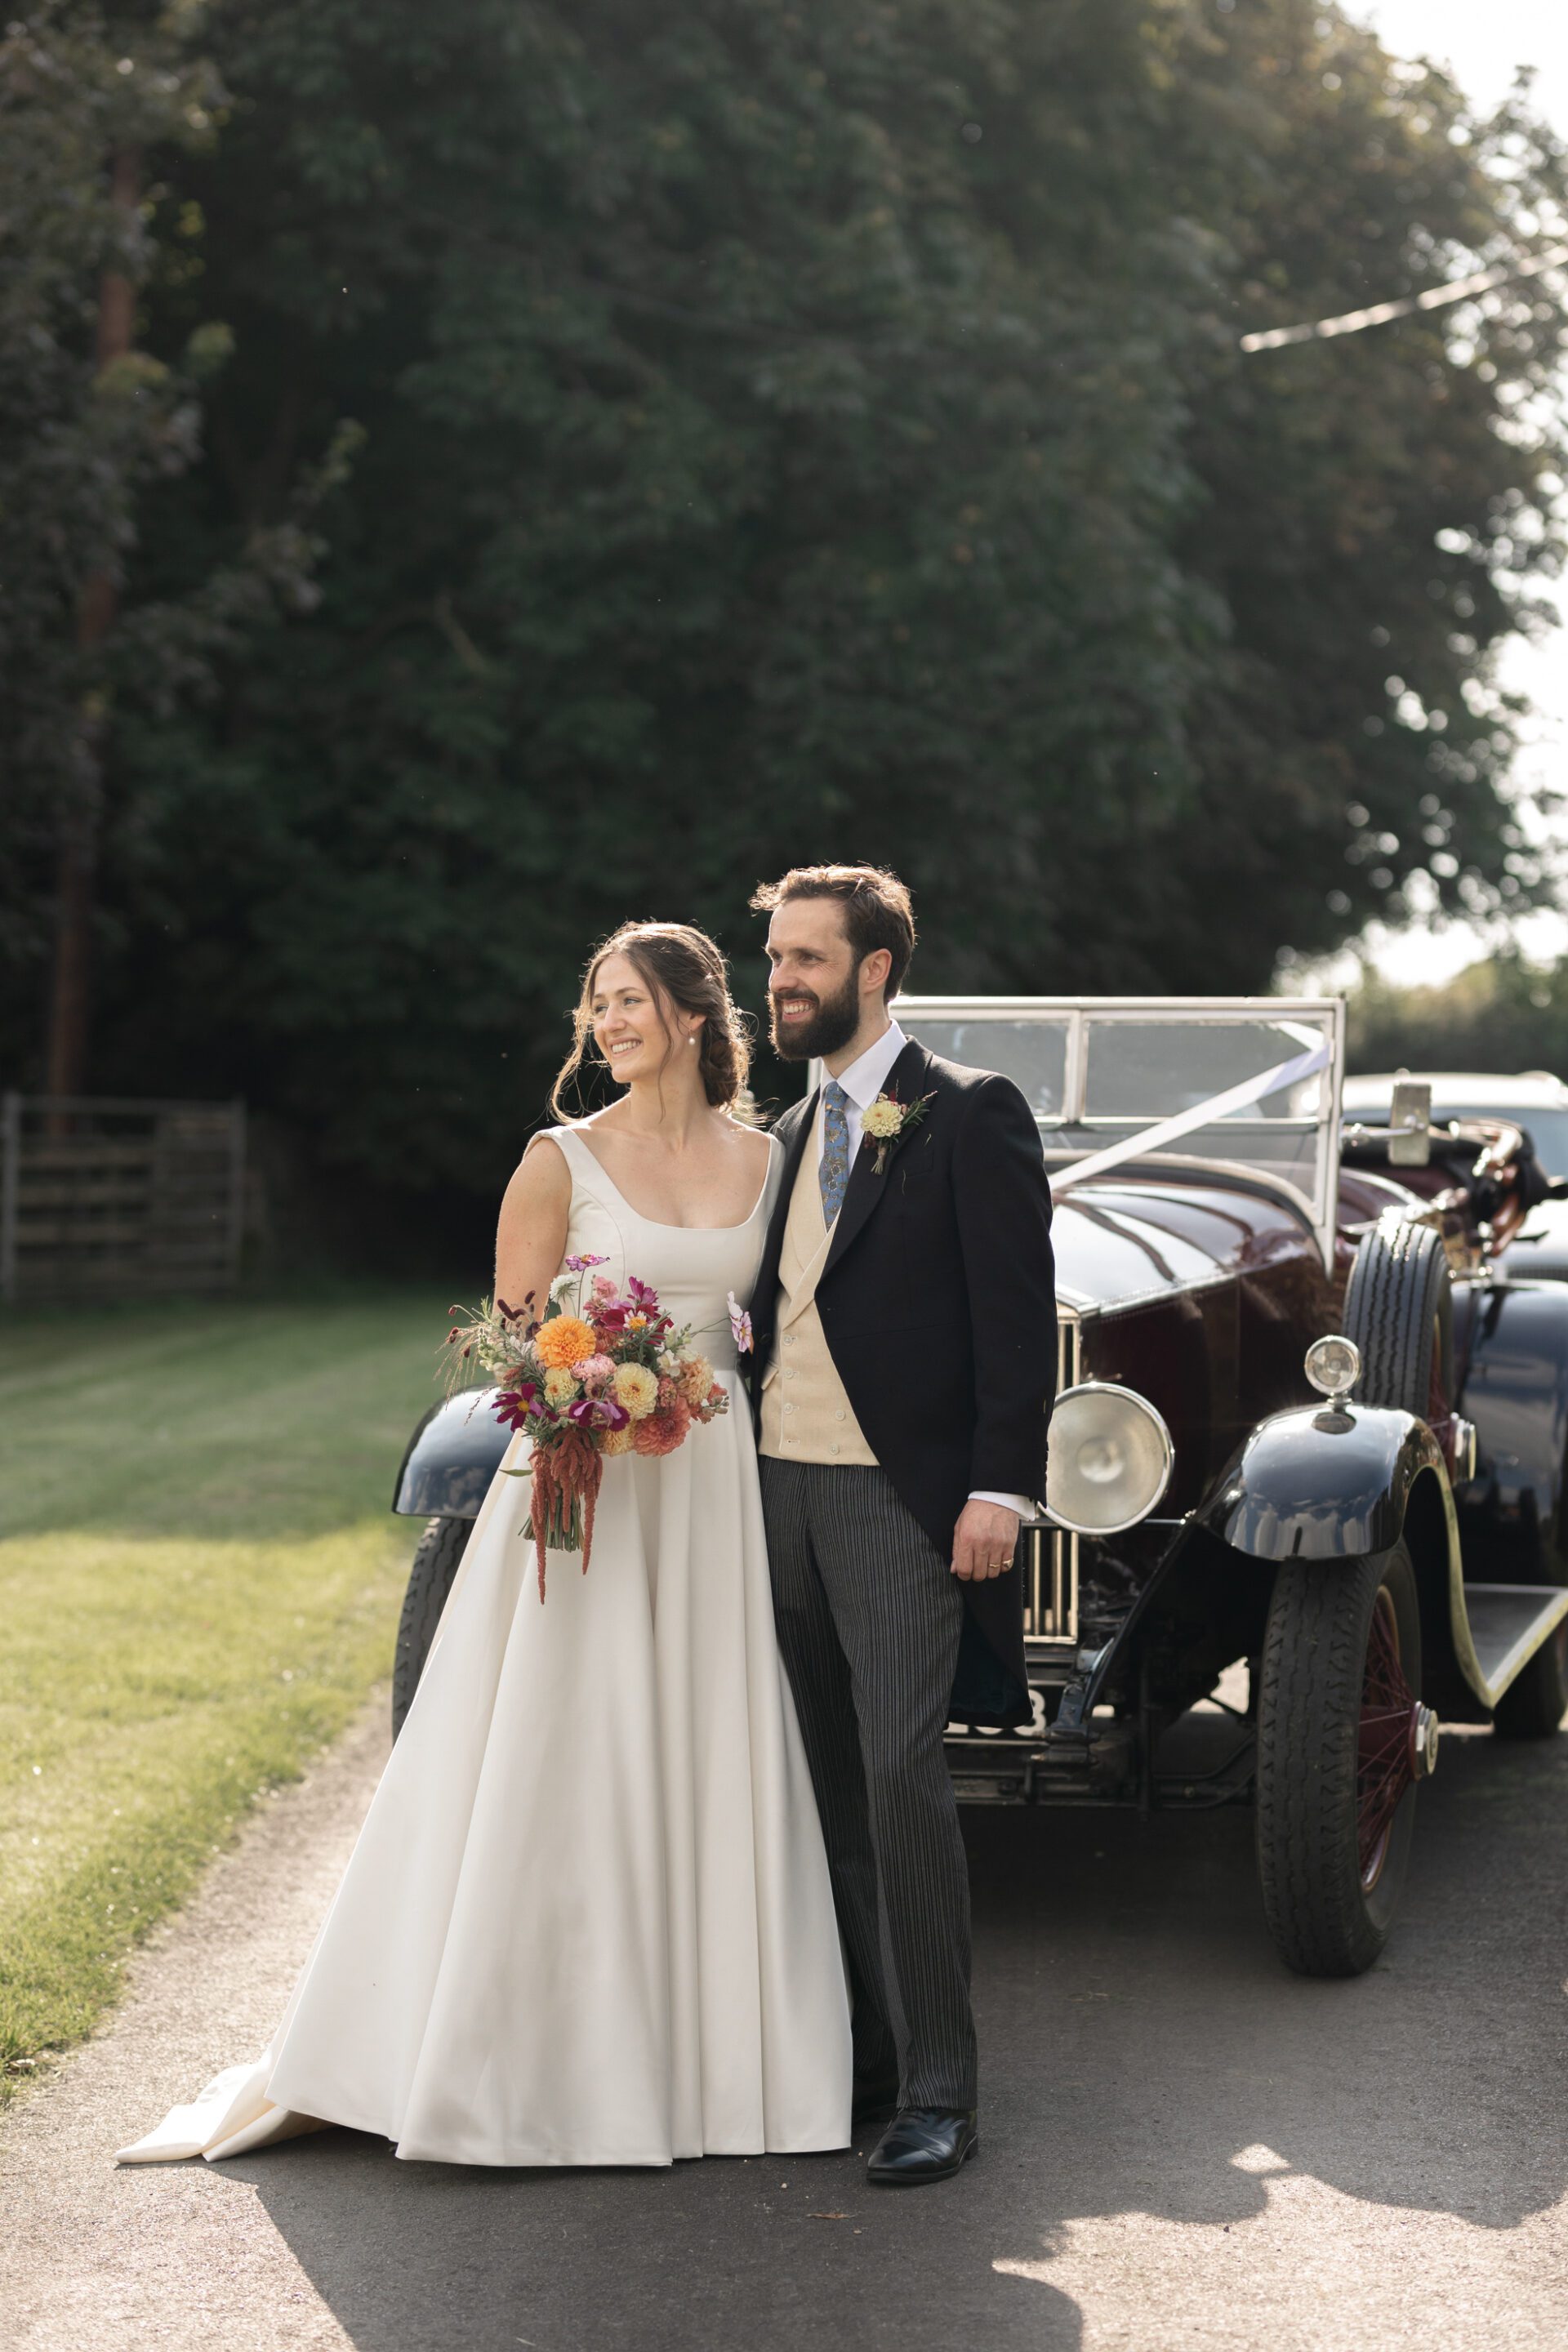 The bride and groom pose for a portrait in front of their vintage wedding car